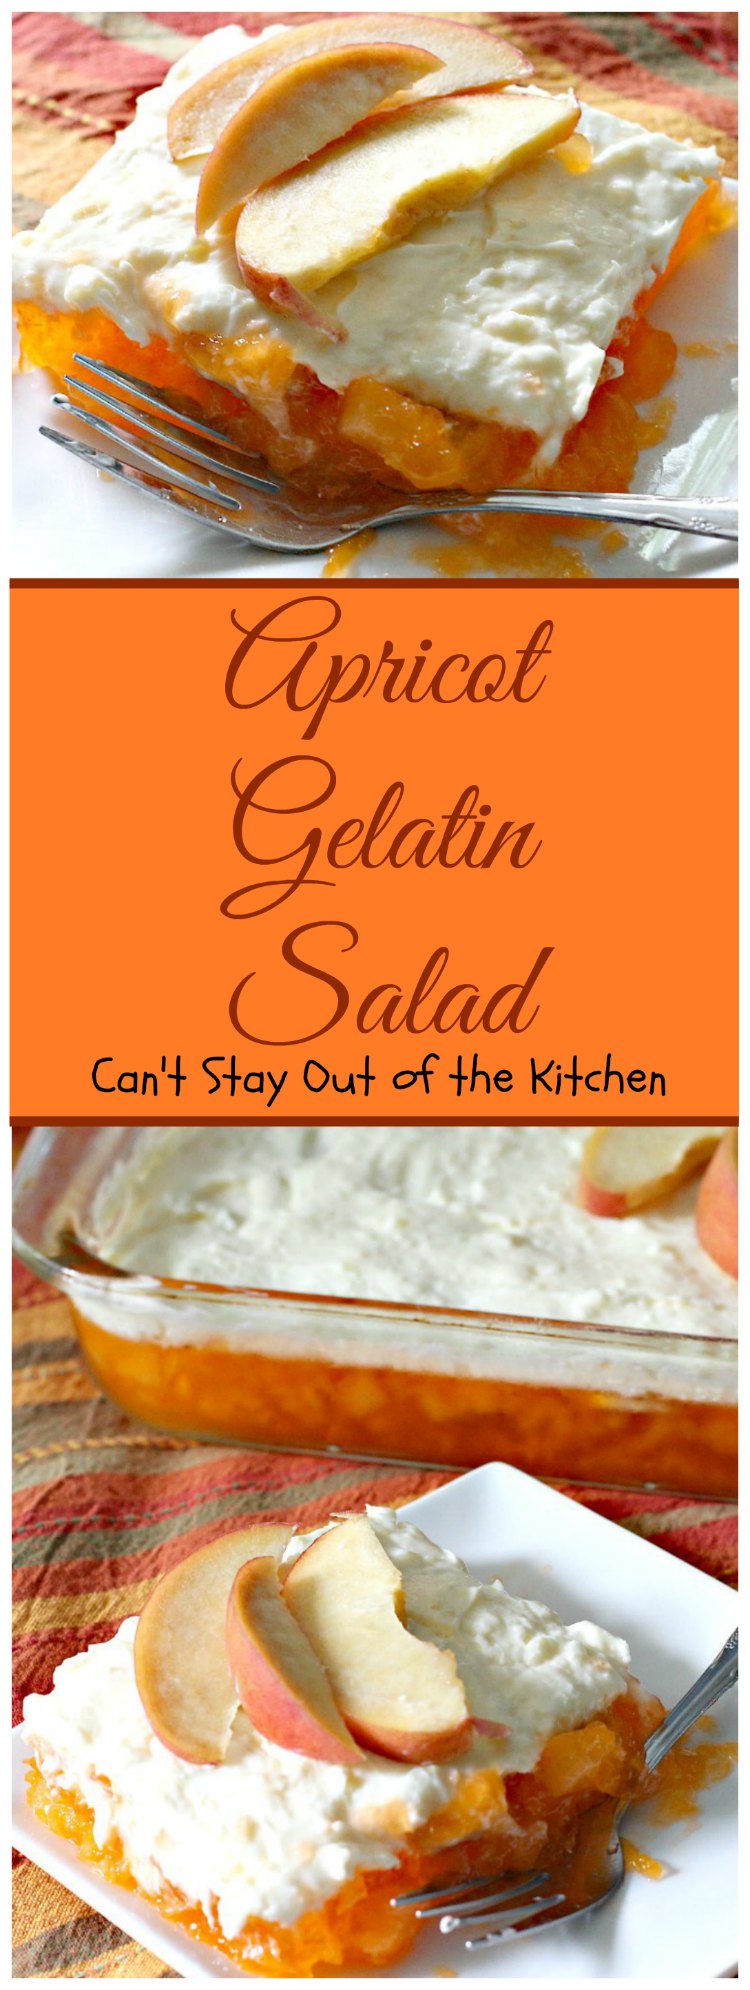 Apricot Gelatin Salad | Can't Stay Out of the Kitchen